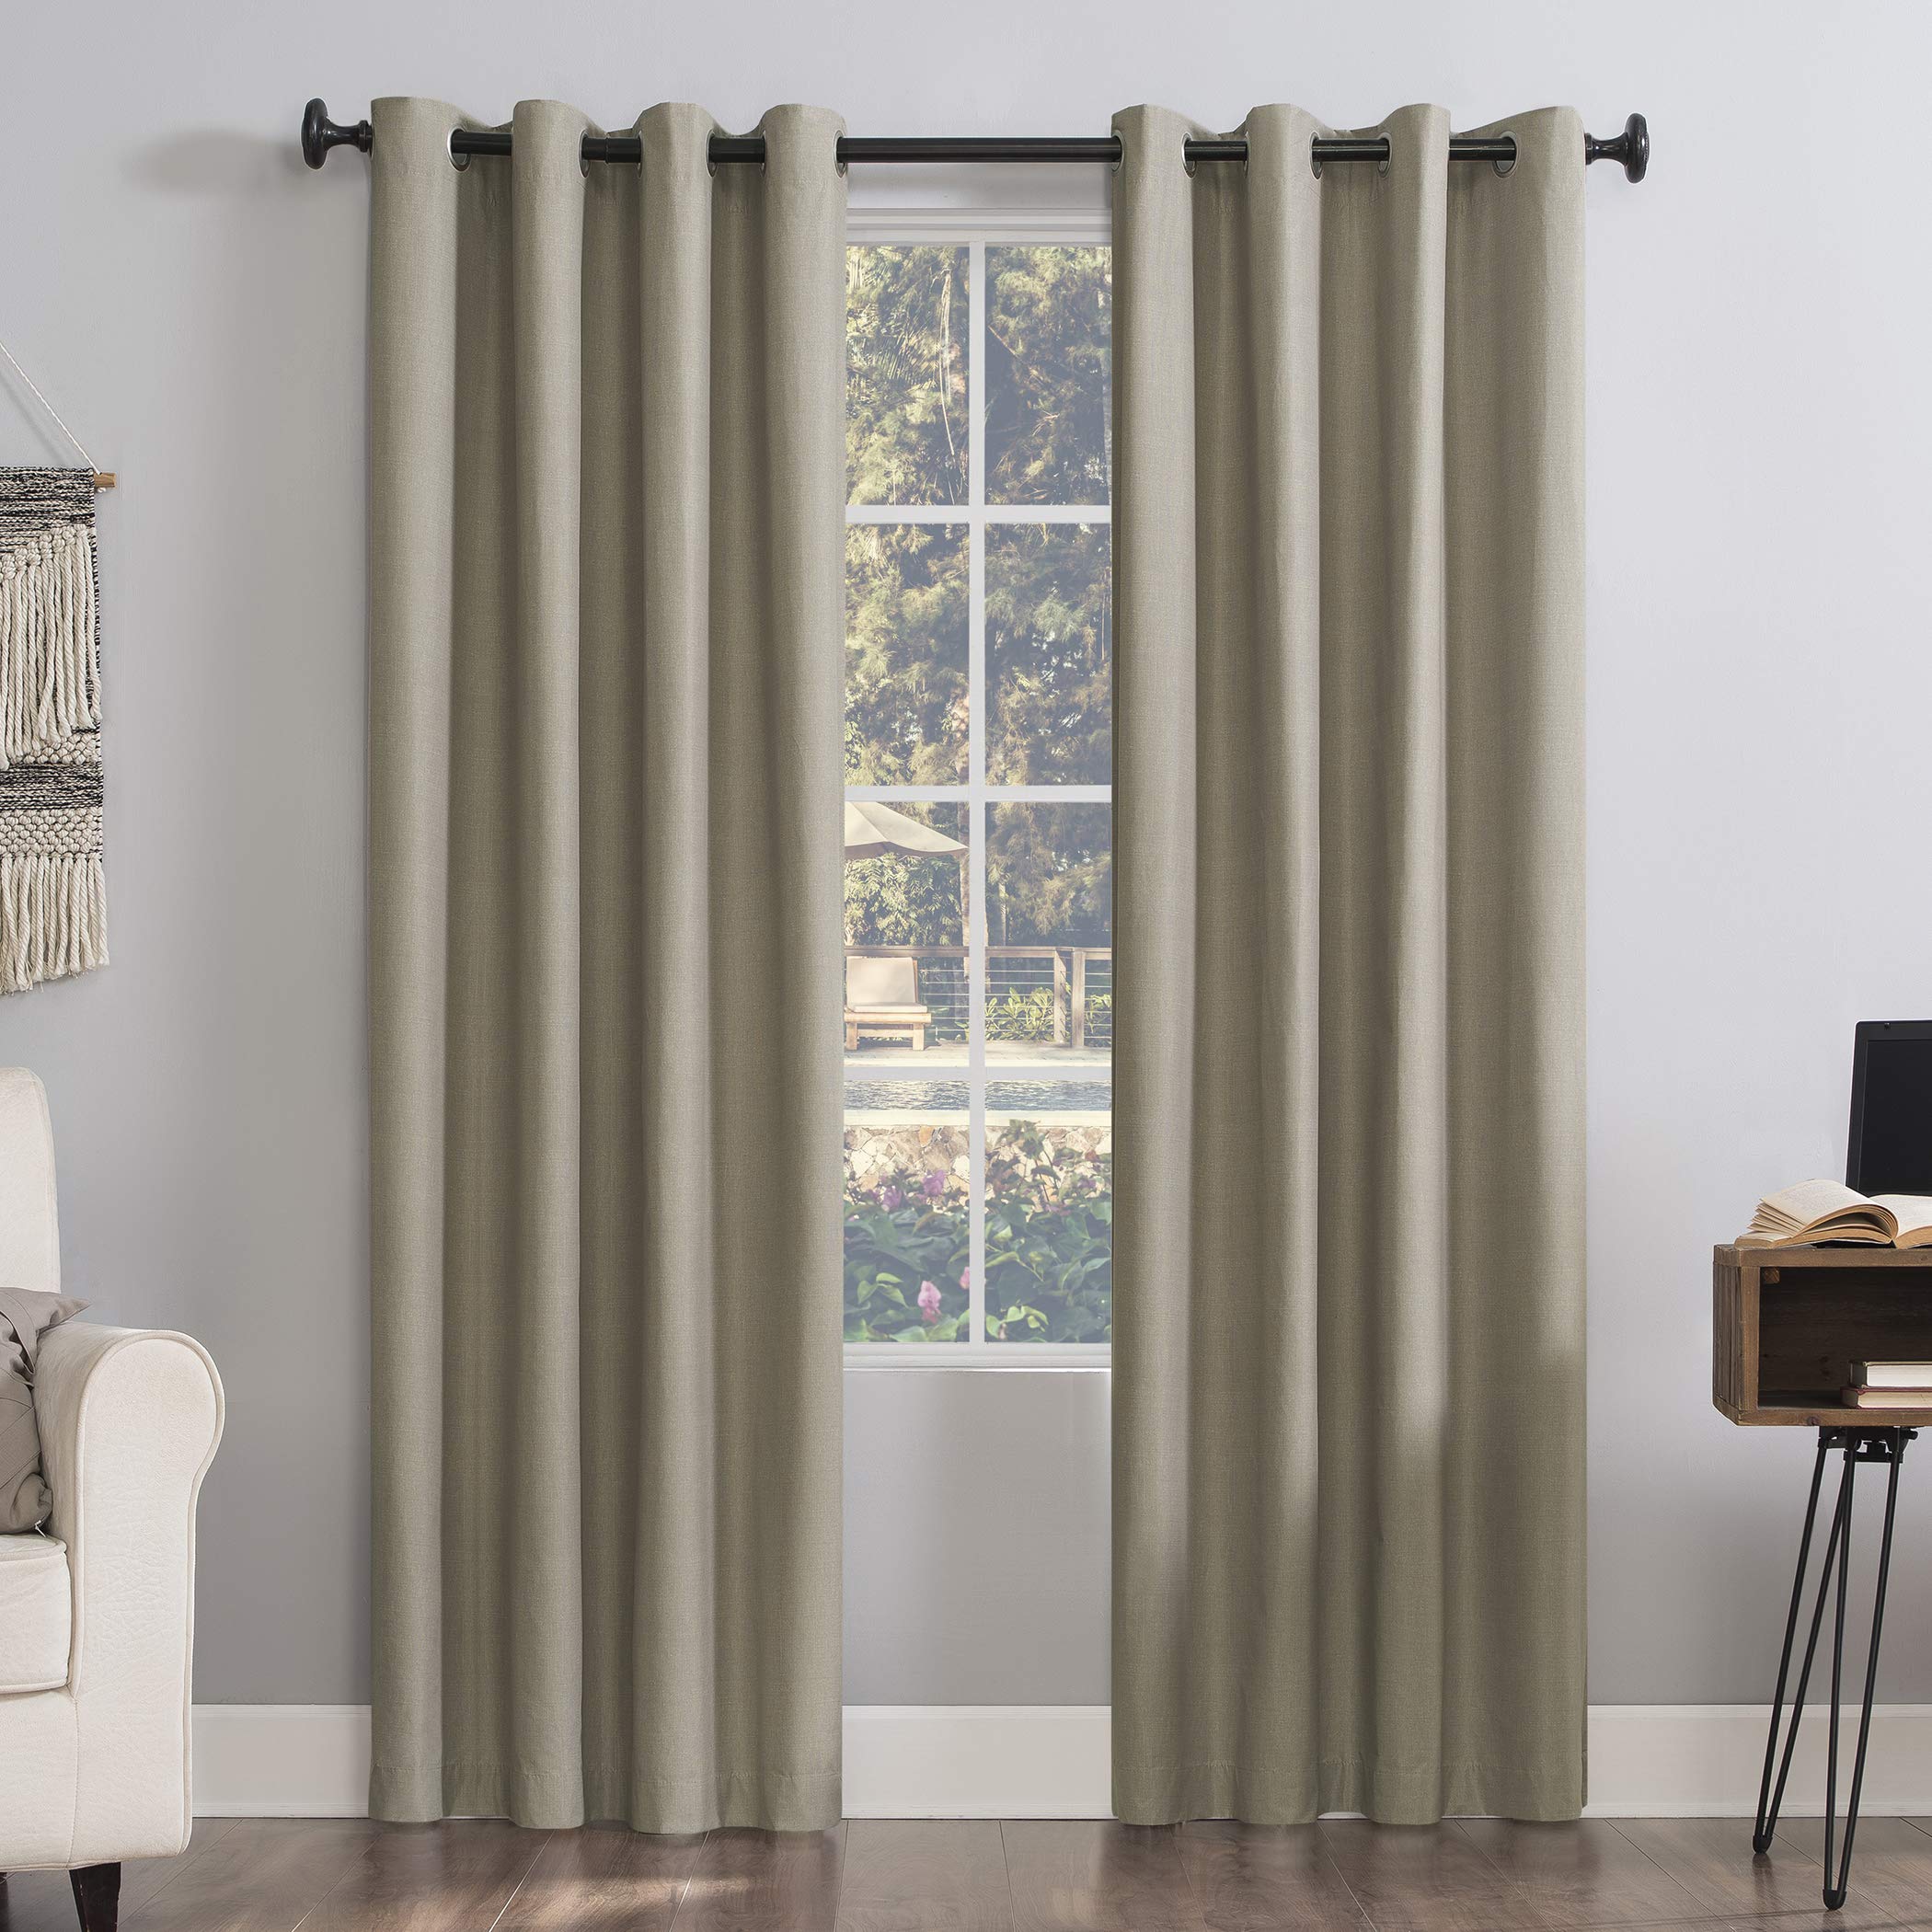 Sun Zero Columbia Thermal Insulated 100% Blackout Grommet Curtain Single Panel, 50" x 84", Linen Off-white